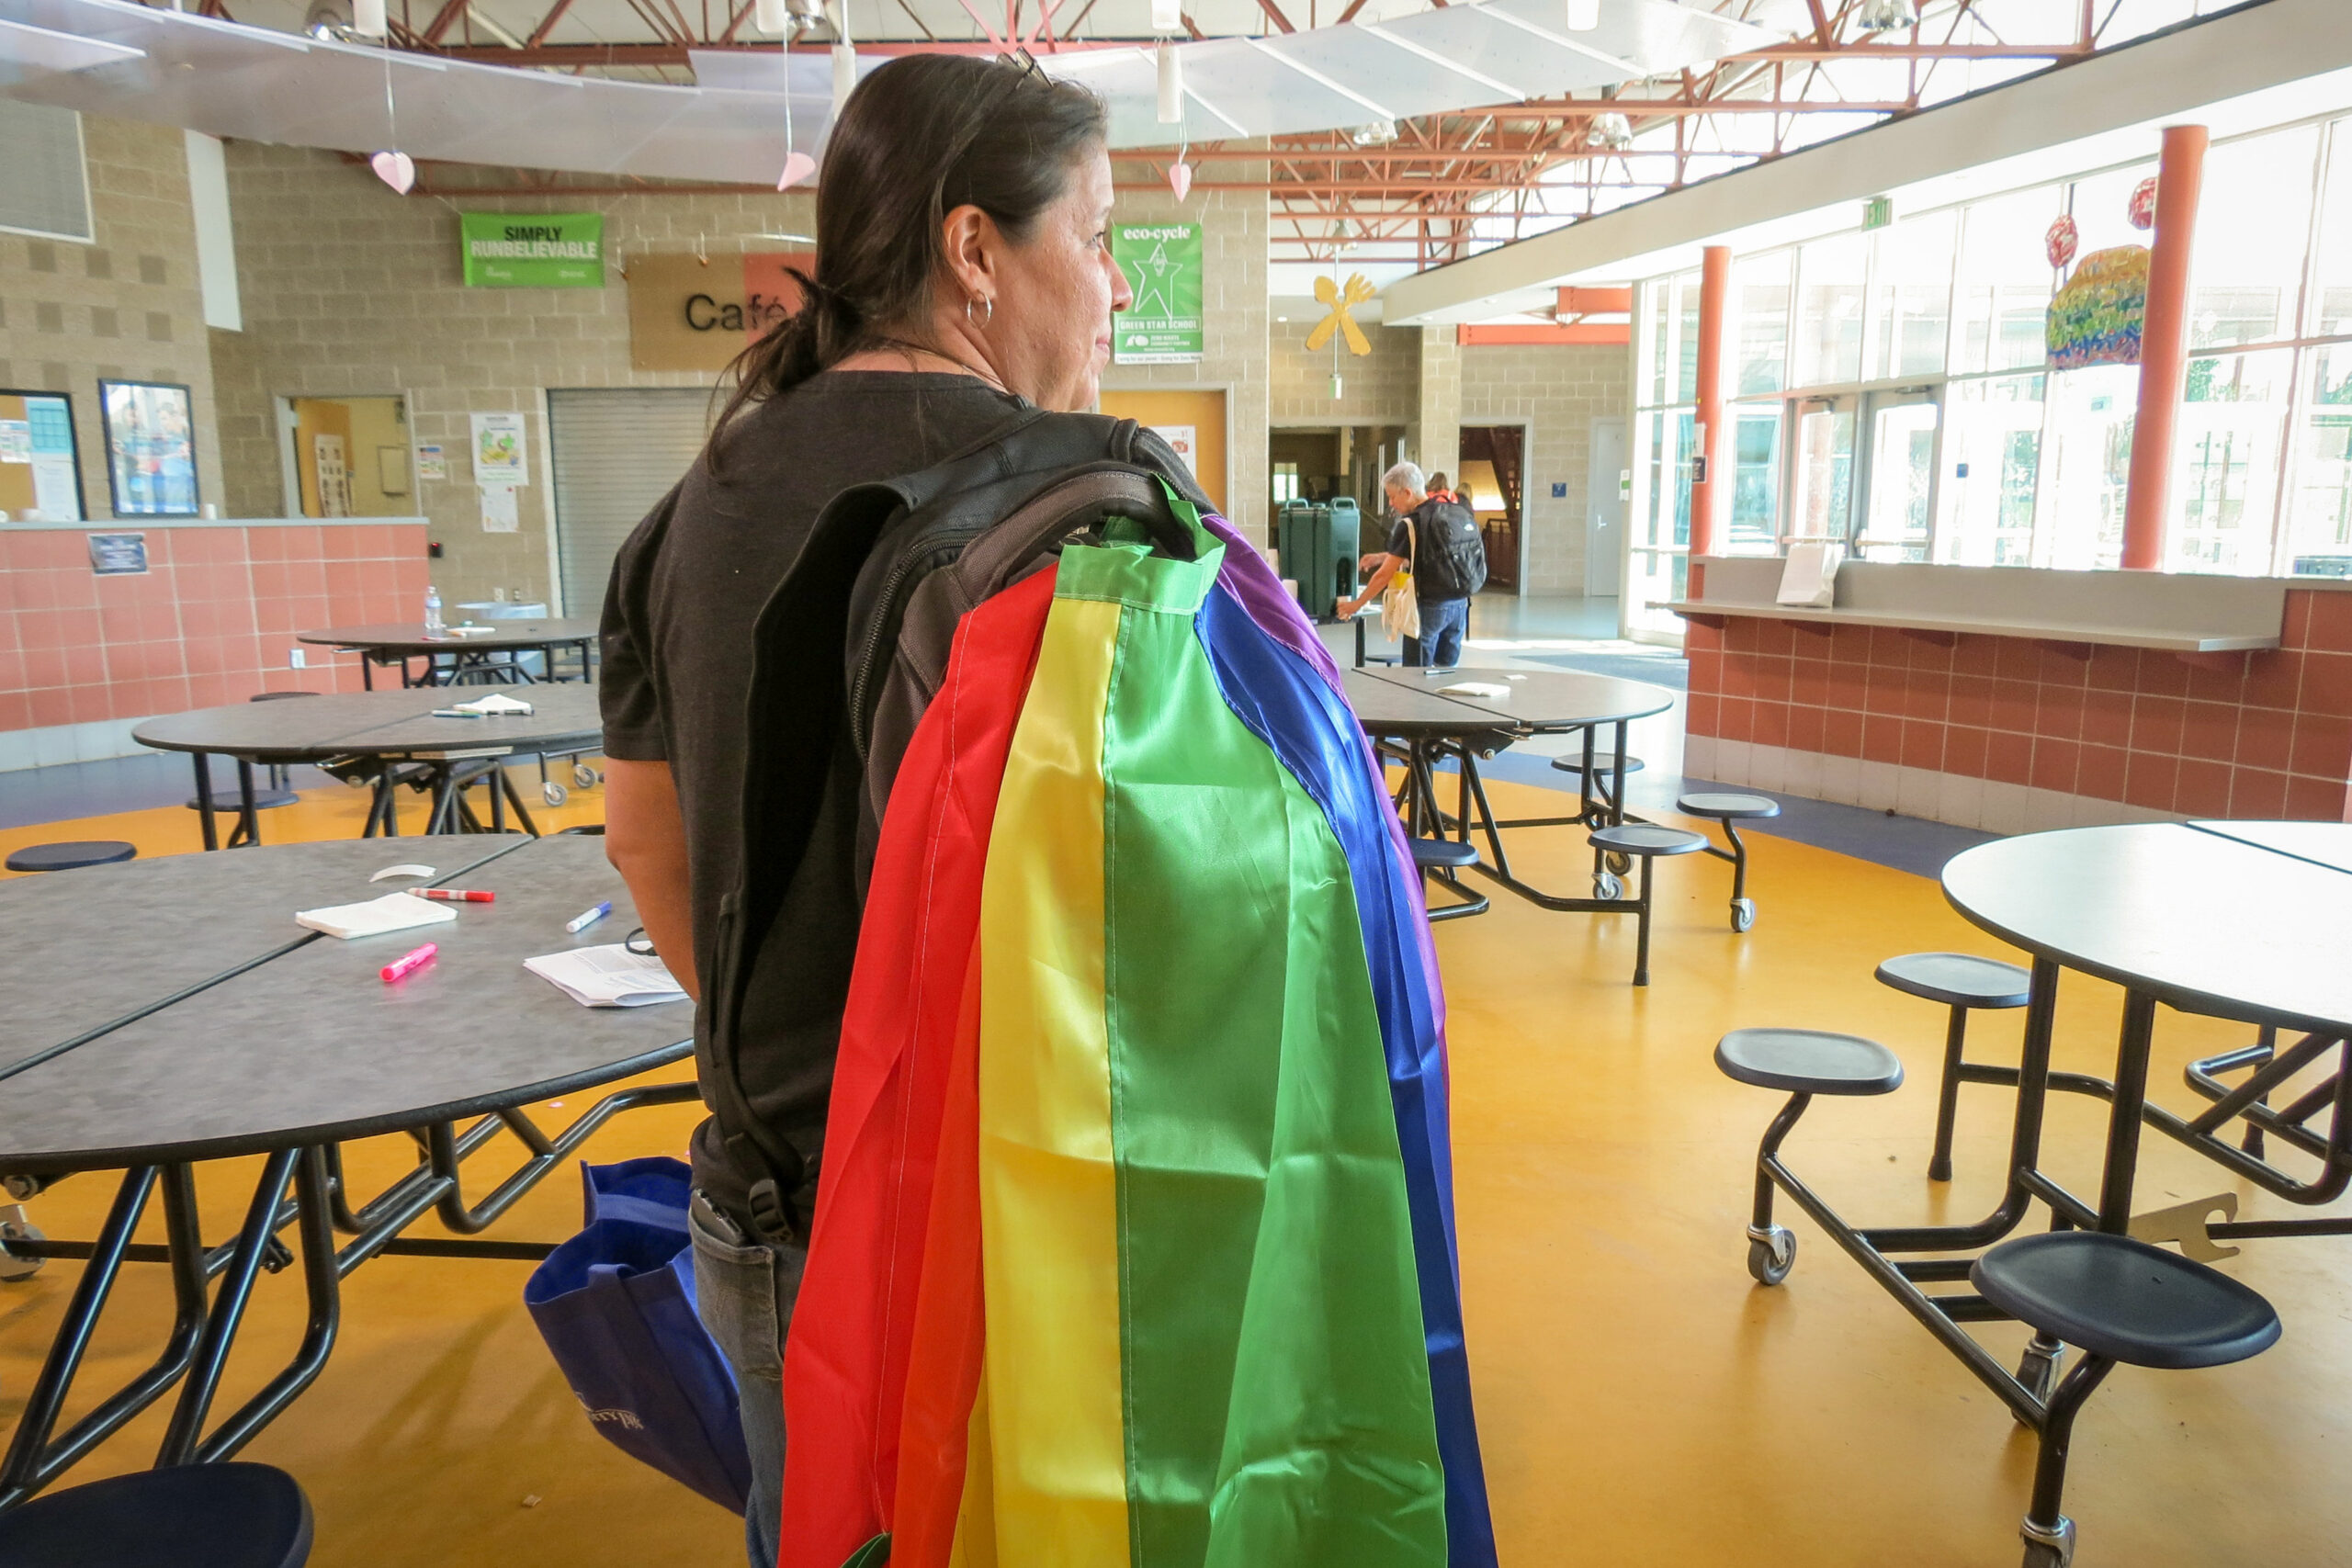 Students are being groomed by teachers to embrace LGBT ‘glitter families’ in place of parents